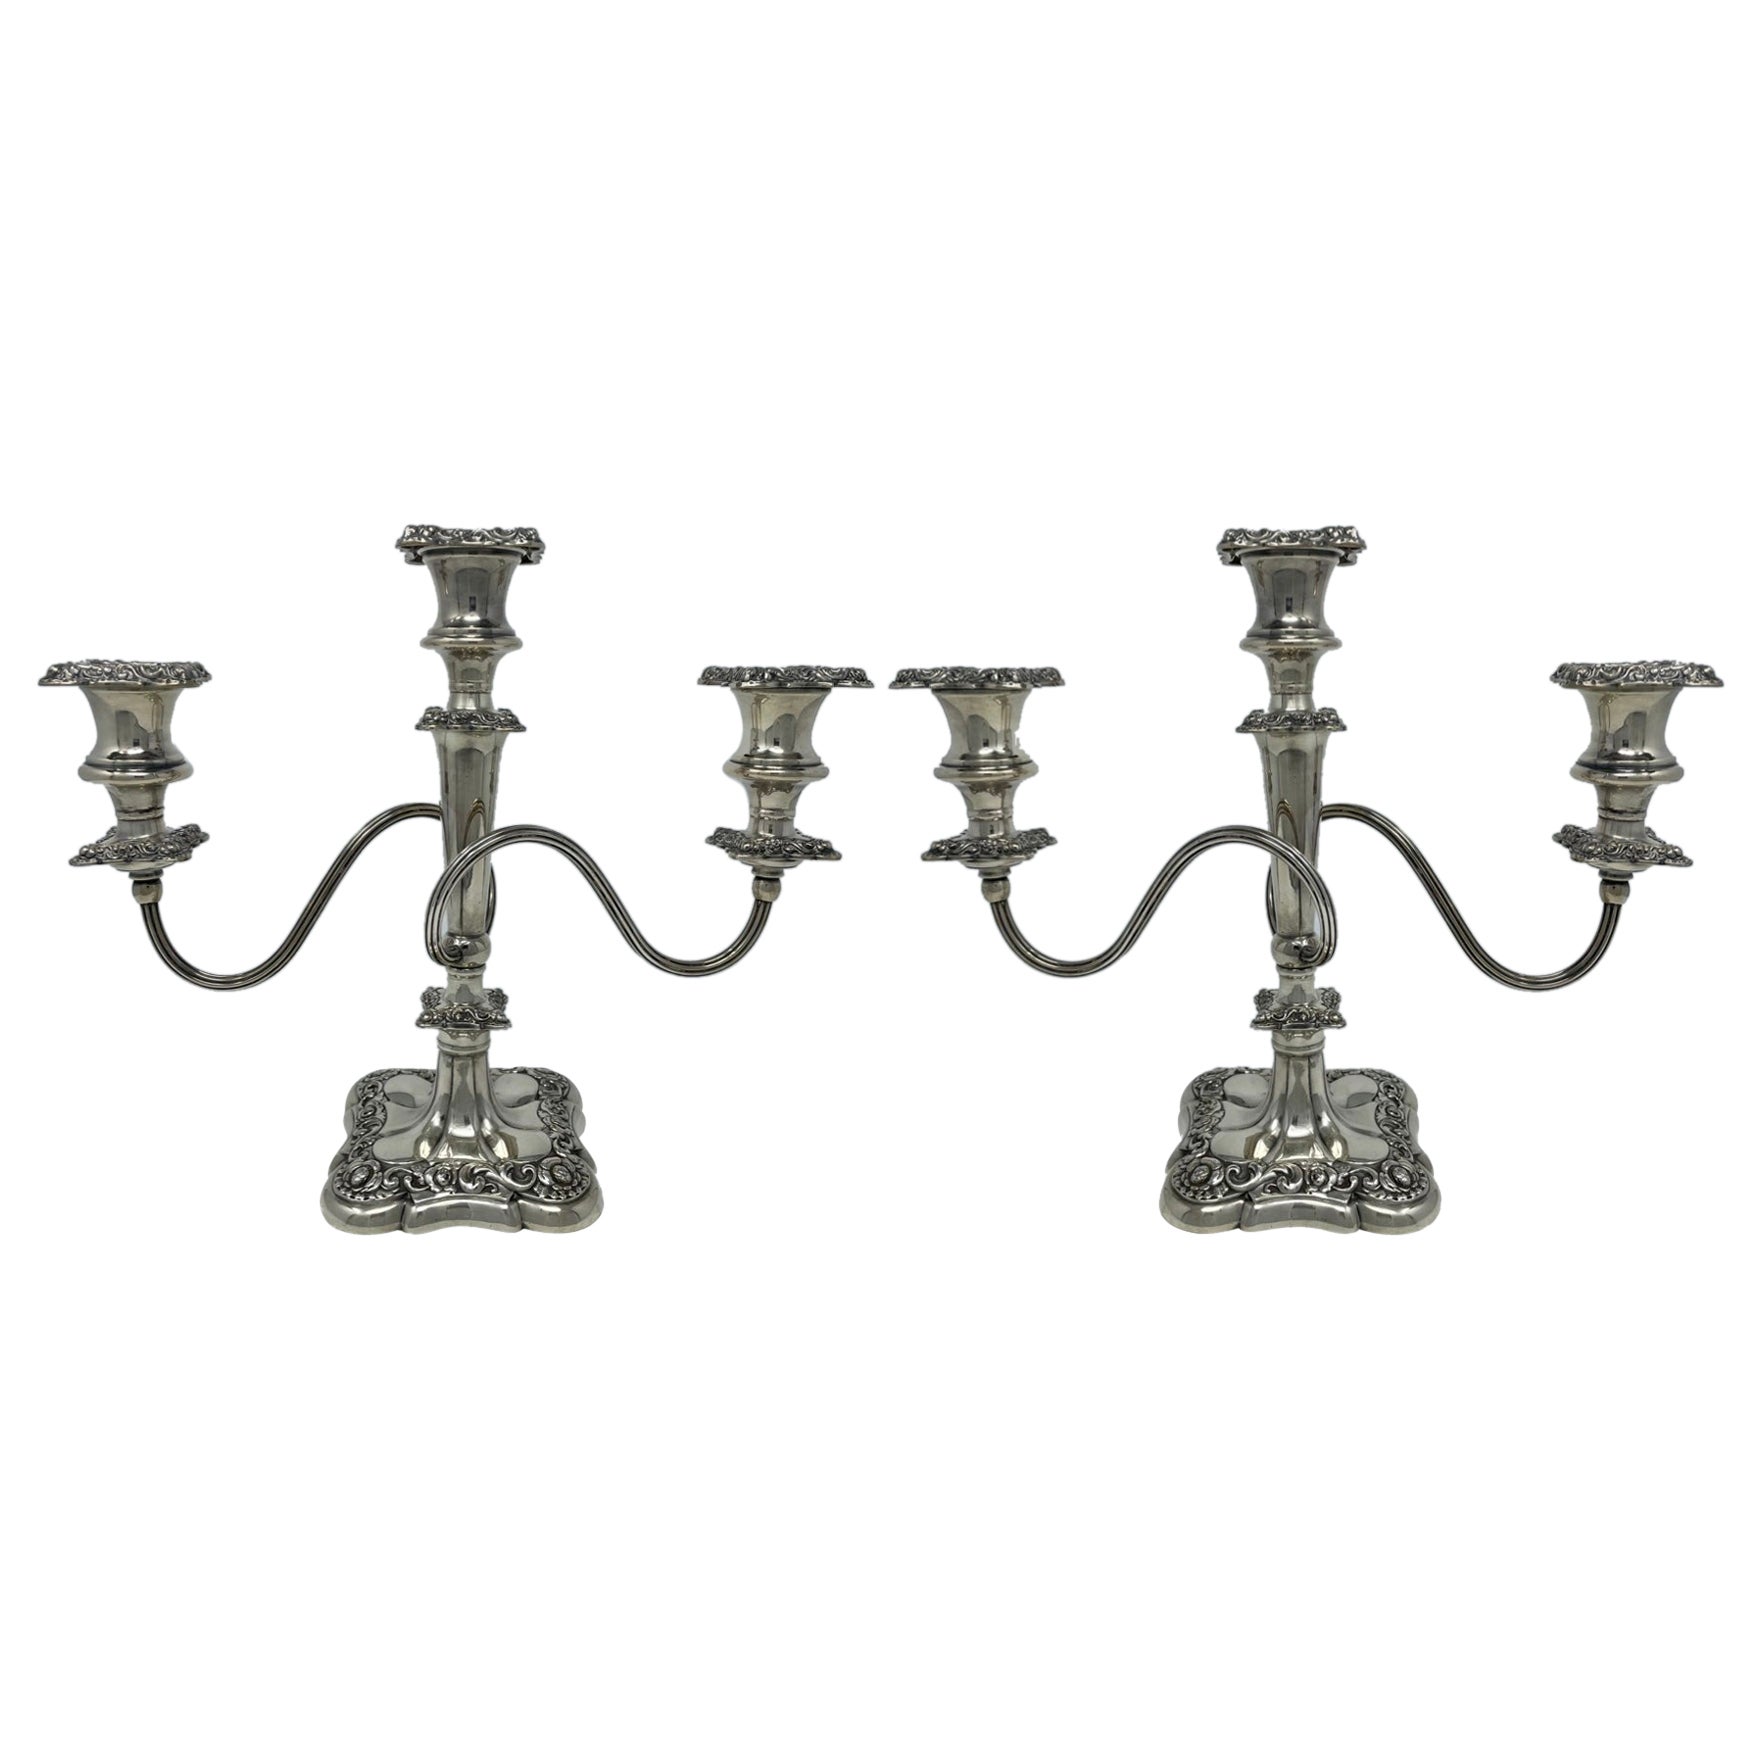 Pair of Antique "Rogers" Silver Plate Candelabra